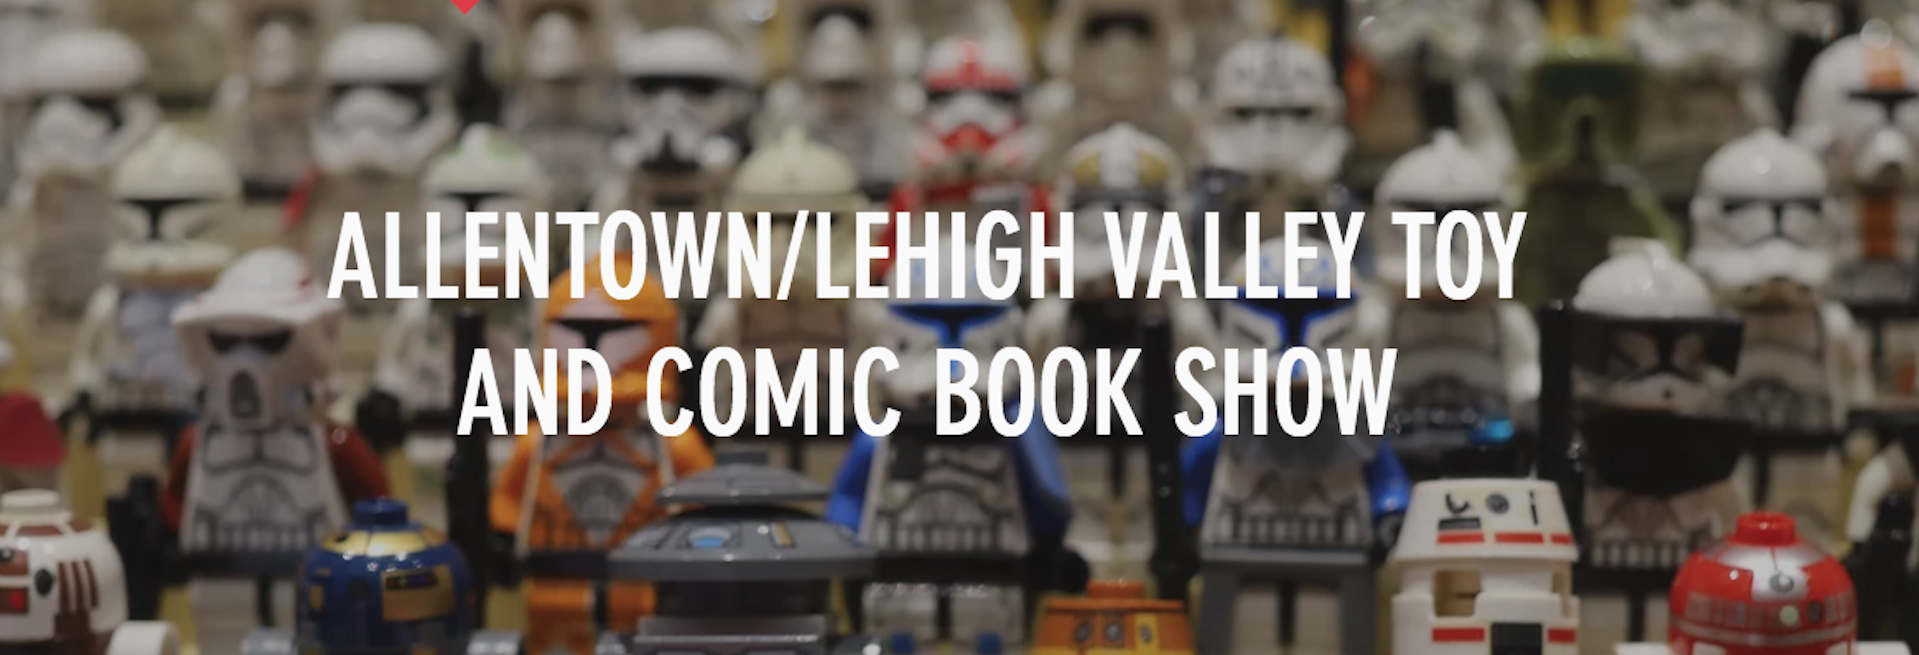 Allentown:Lehigh Valley Toy and Comic Book Show